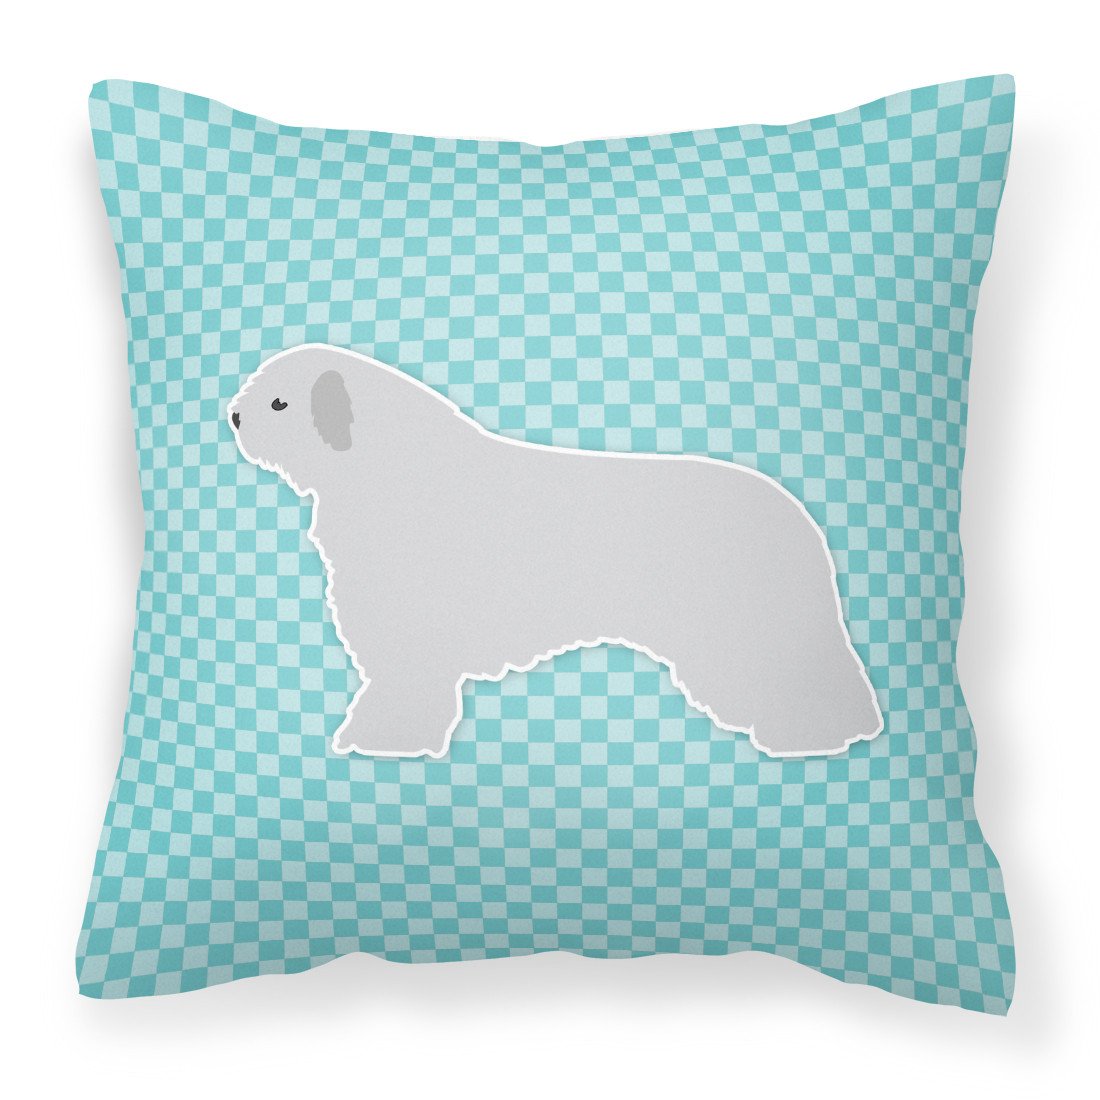 Spanish Water Dog Checkerboard Blue Fabric Decorative Pillow BB3715PW1818 by Caroline's Treasures